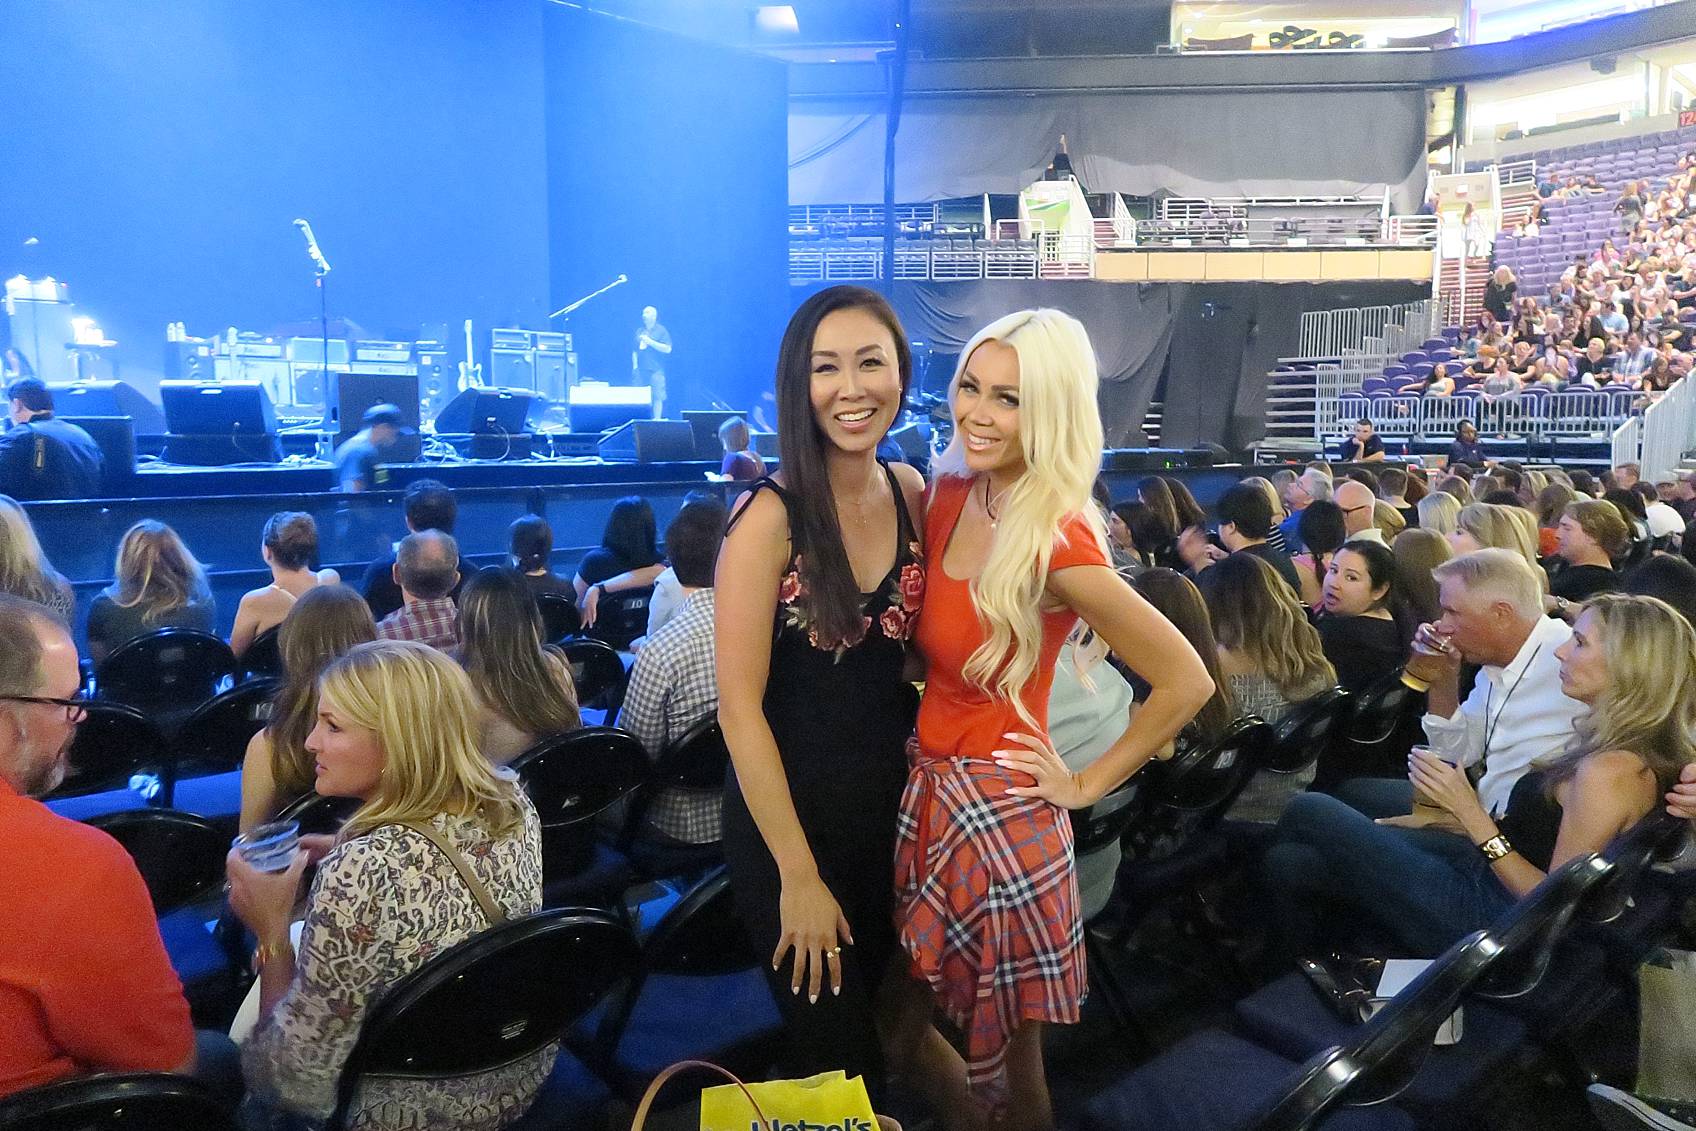 Diana Elizabeth blogger with friend in 5th row John Mayer concert to show how close seats are